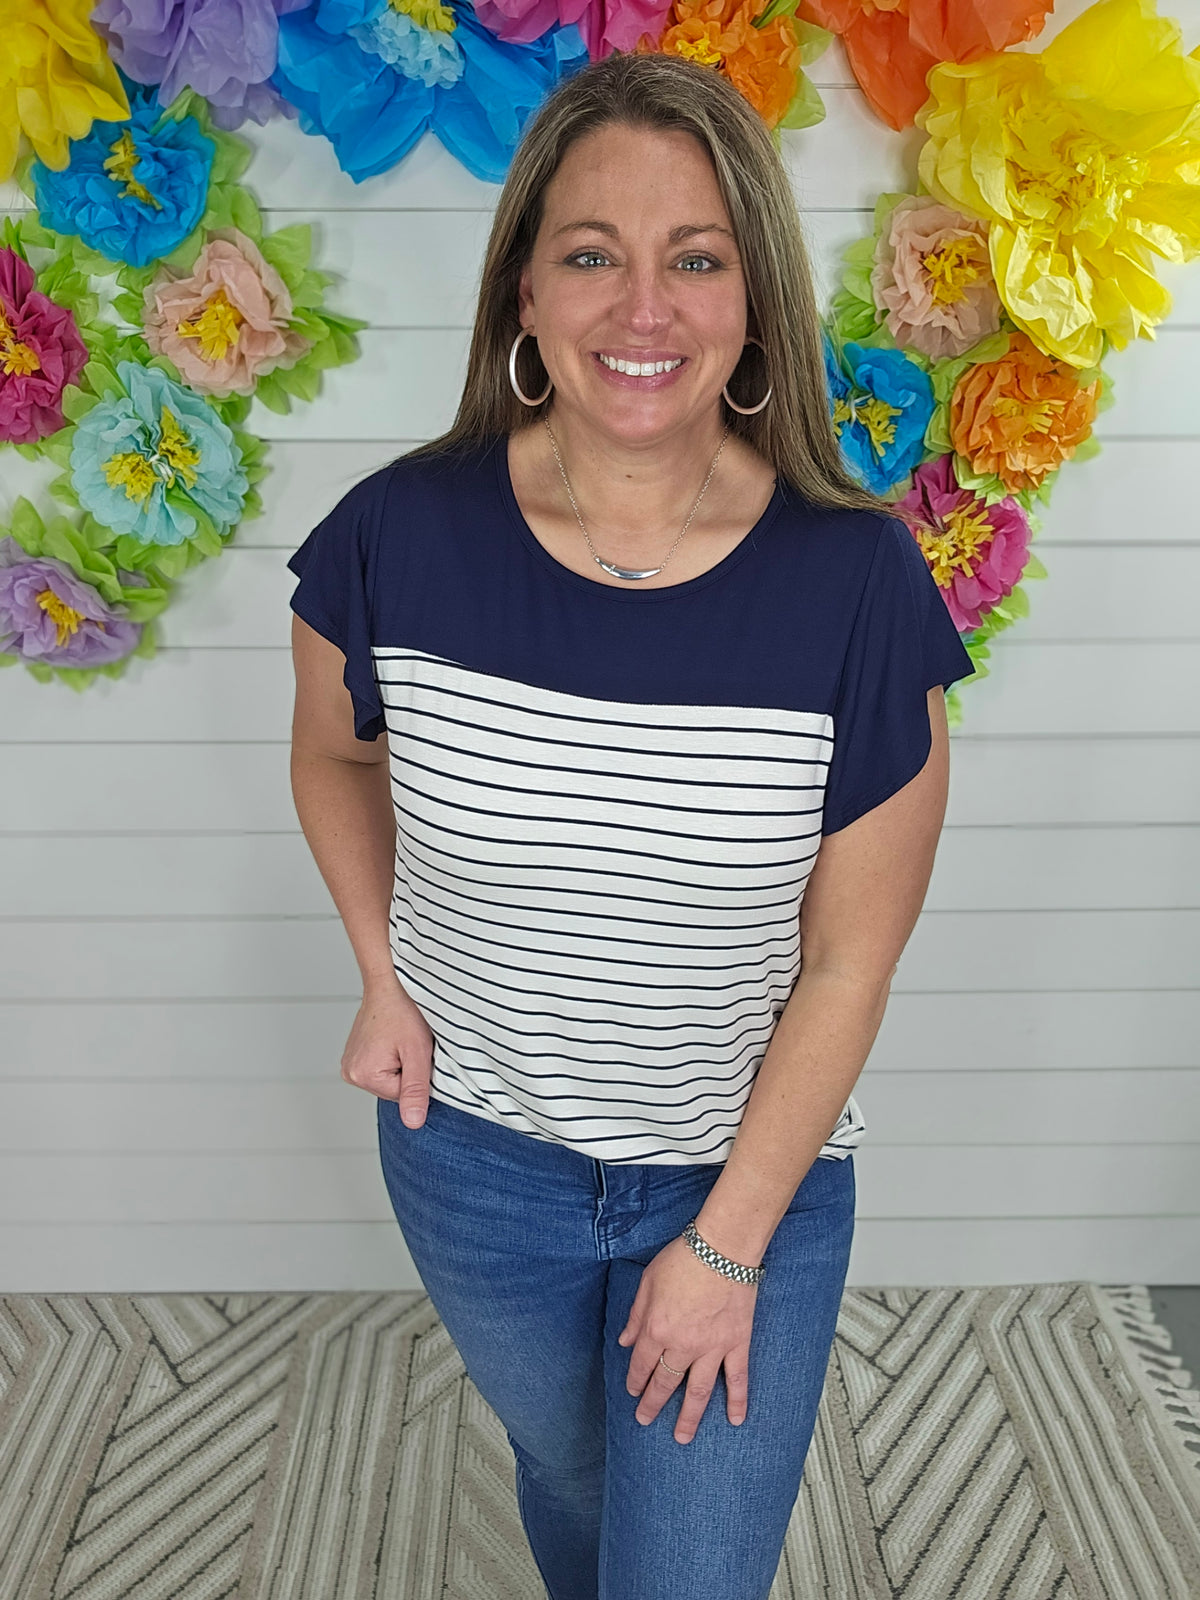 NAVY/STRIPED COLORBLOCK RUFFLE SLEEVE KNIT TOP